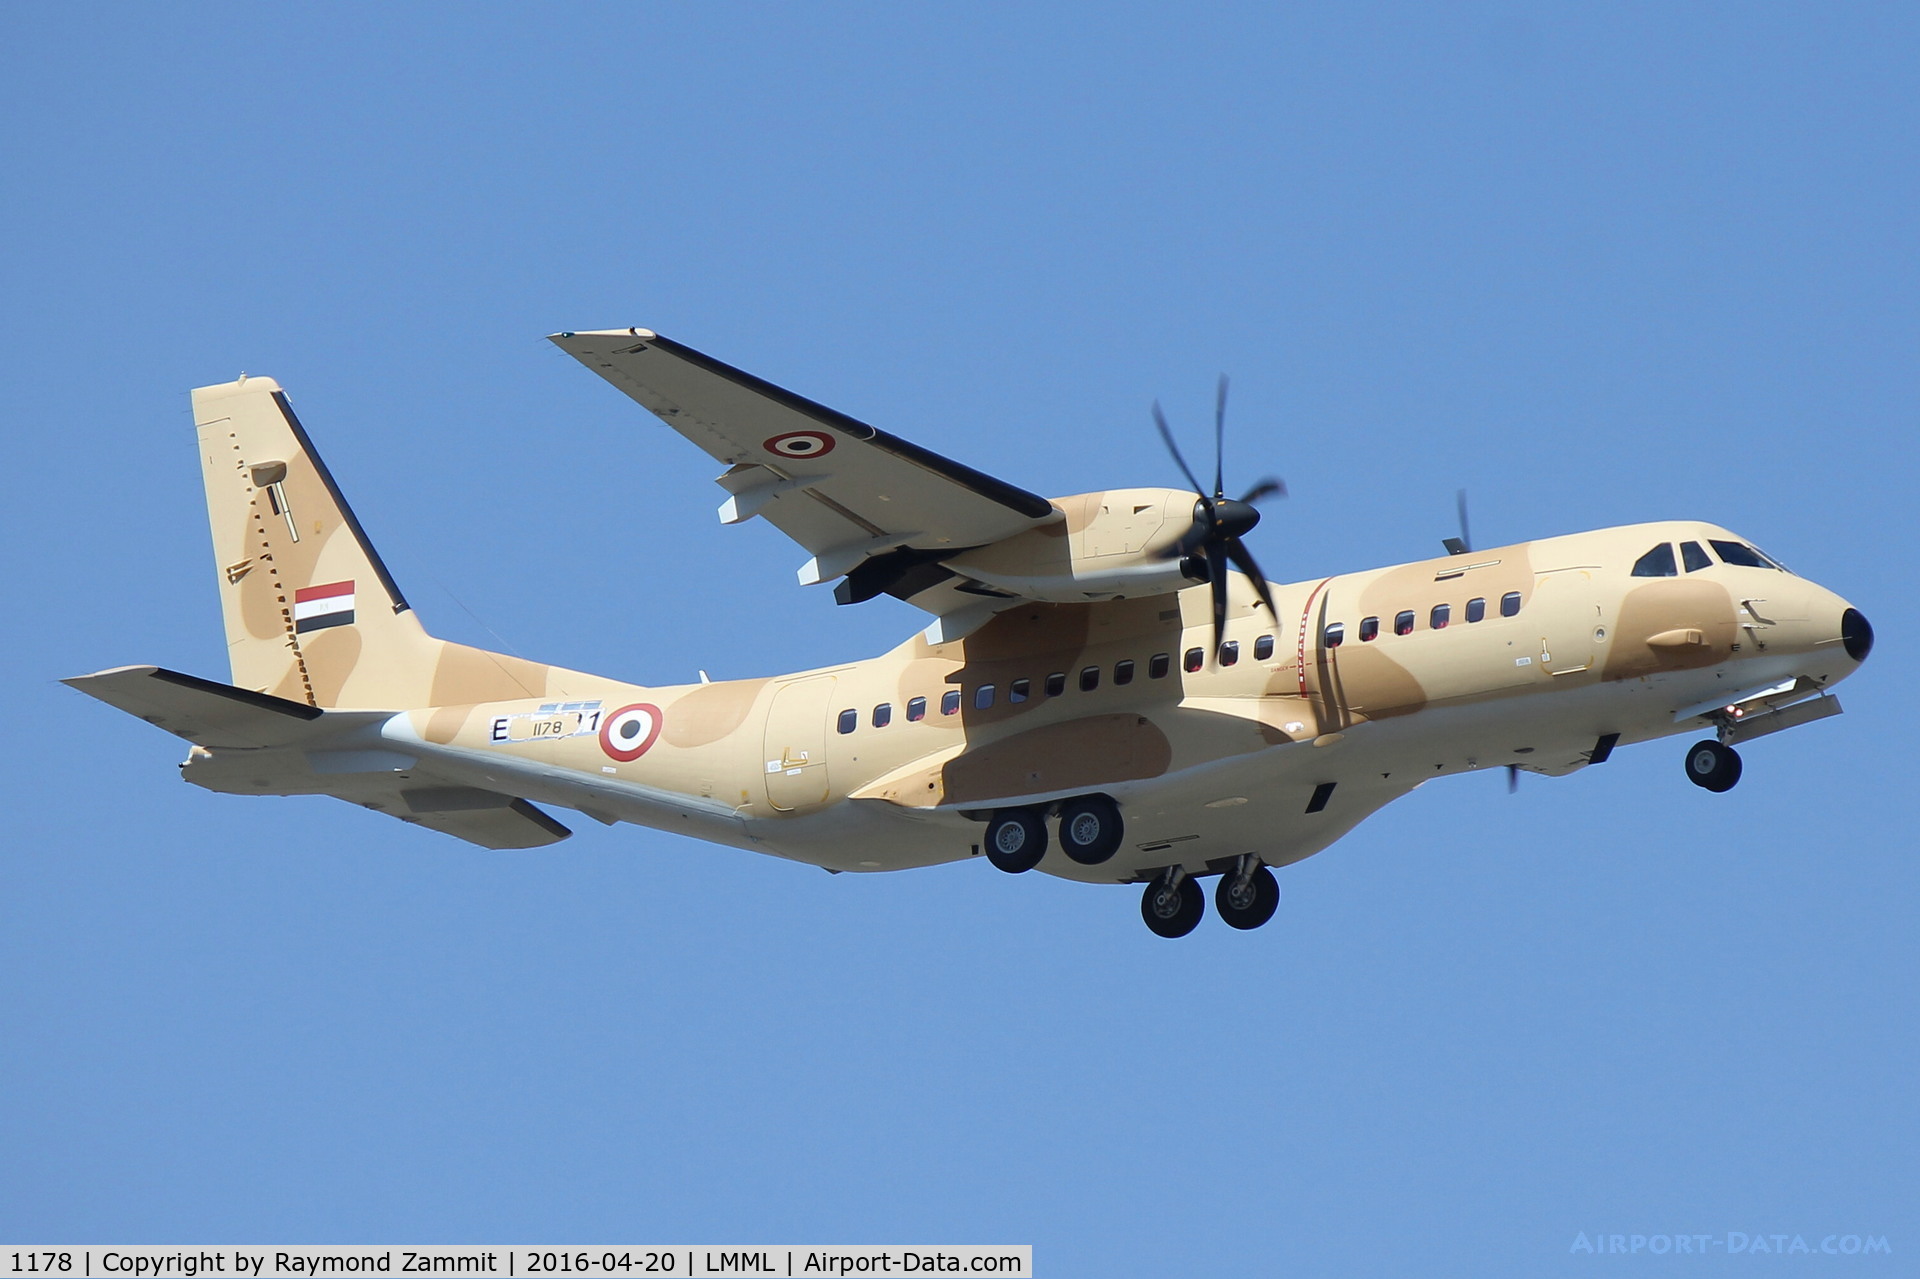 1178, 2015 CASA C-295M C/N S-147, CASA C-295M 1178 on delivery flight to join the Egyptian Air Force. Seen here landing in Malta for a night stop.